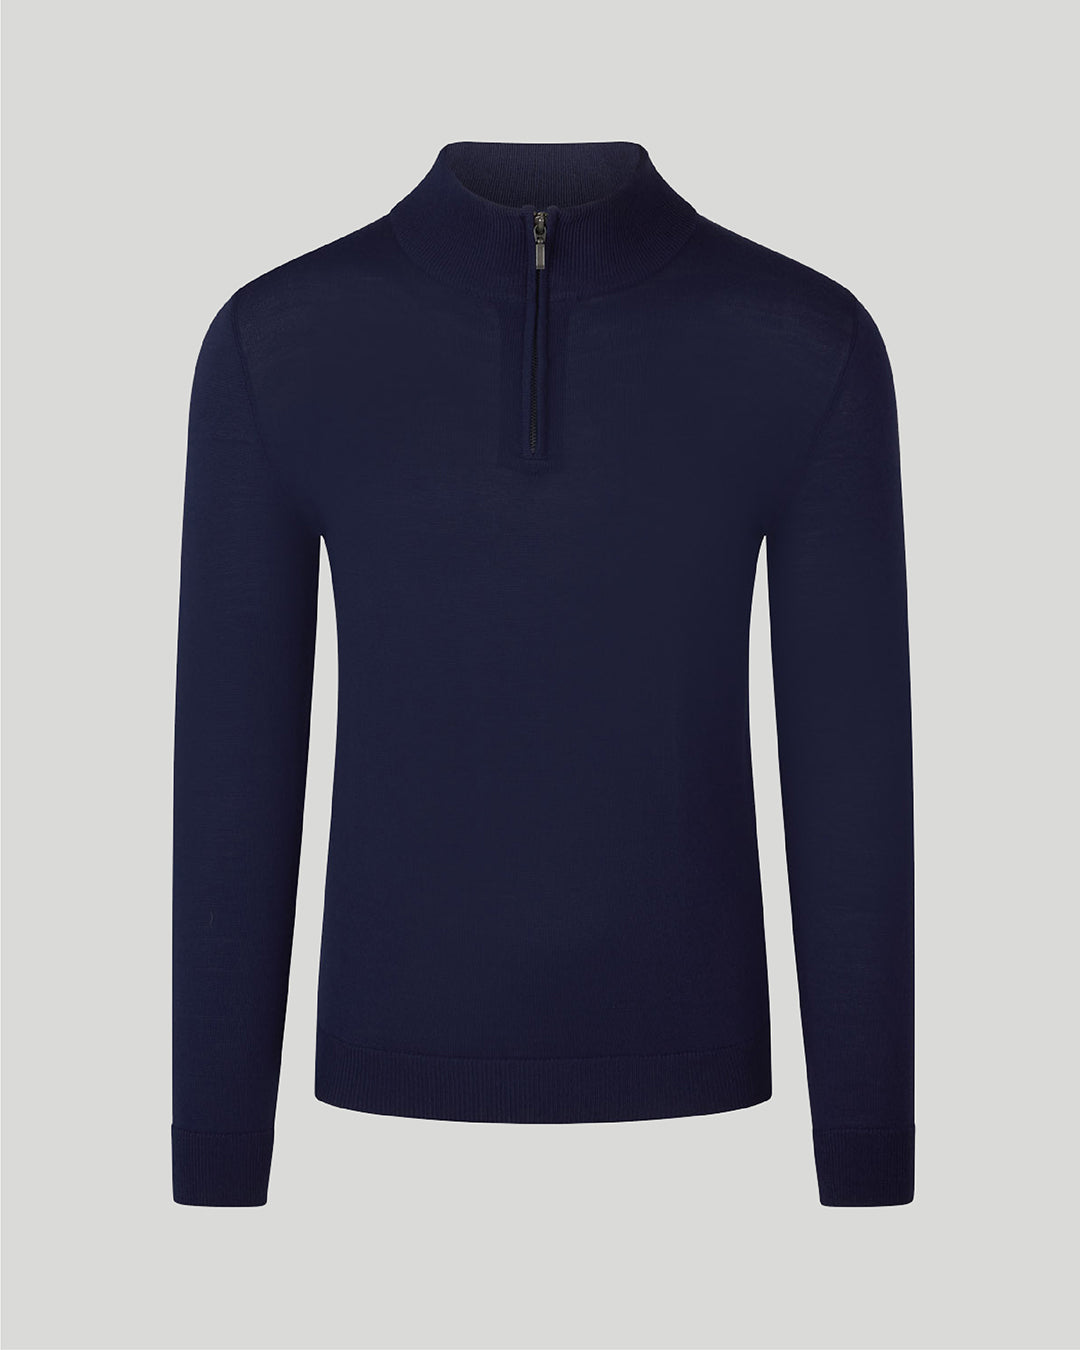 Image of our merino wool 1/4 zip jumper in navy for men are made from a lightweight fabric and reactive natural fibre. 